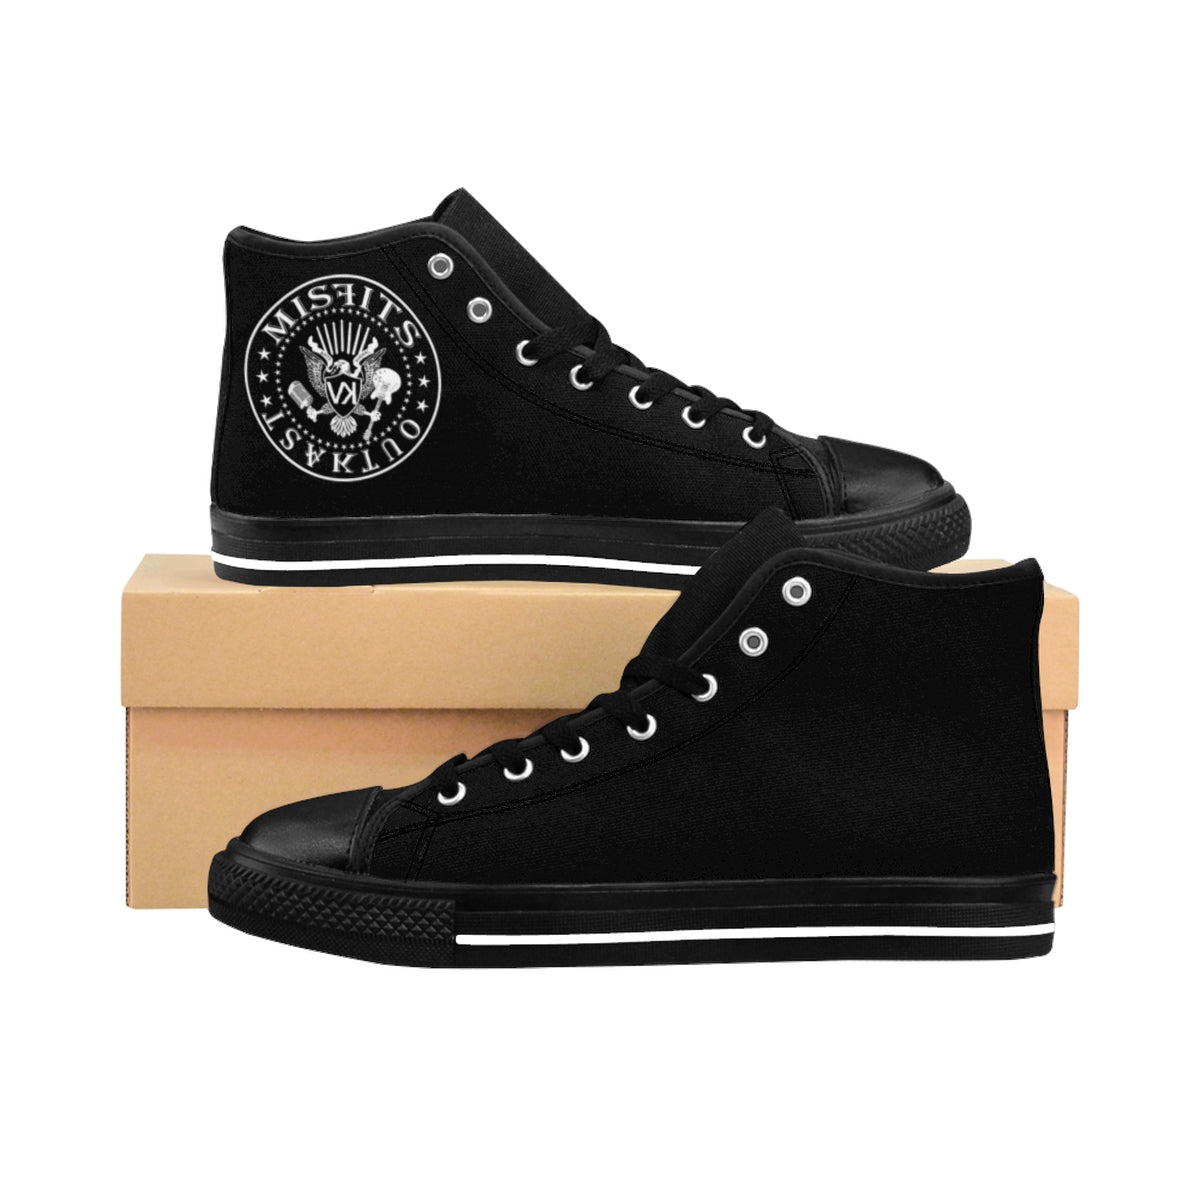 Misfits and Outkast Men's High-top Sneakers